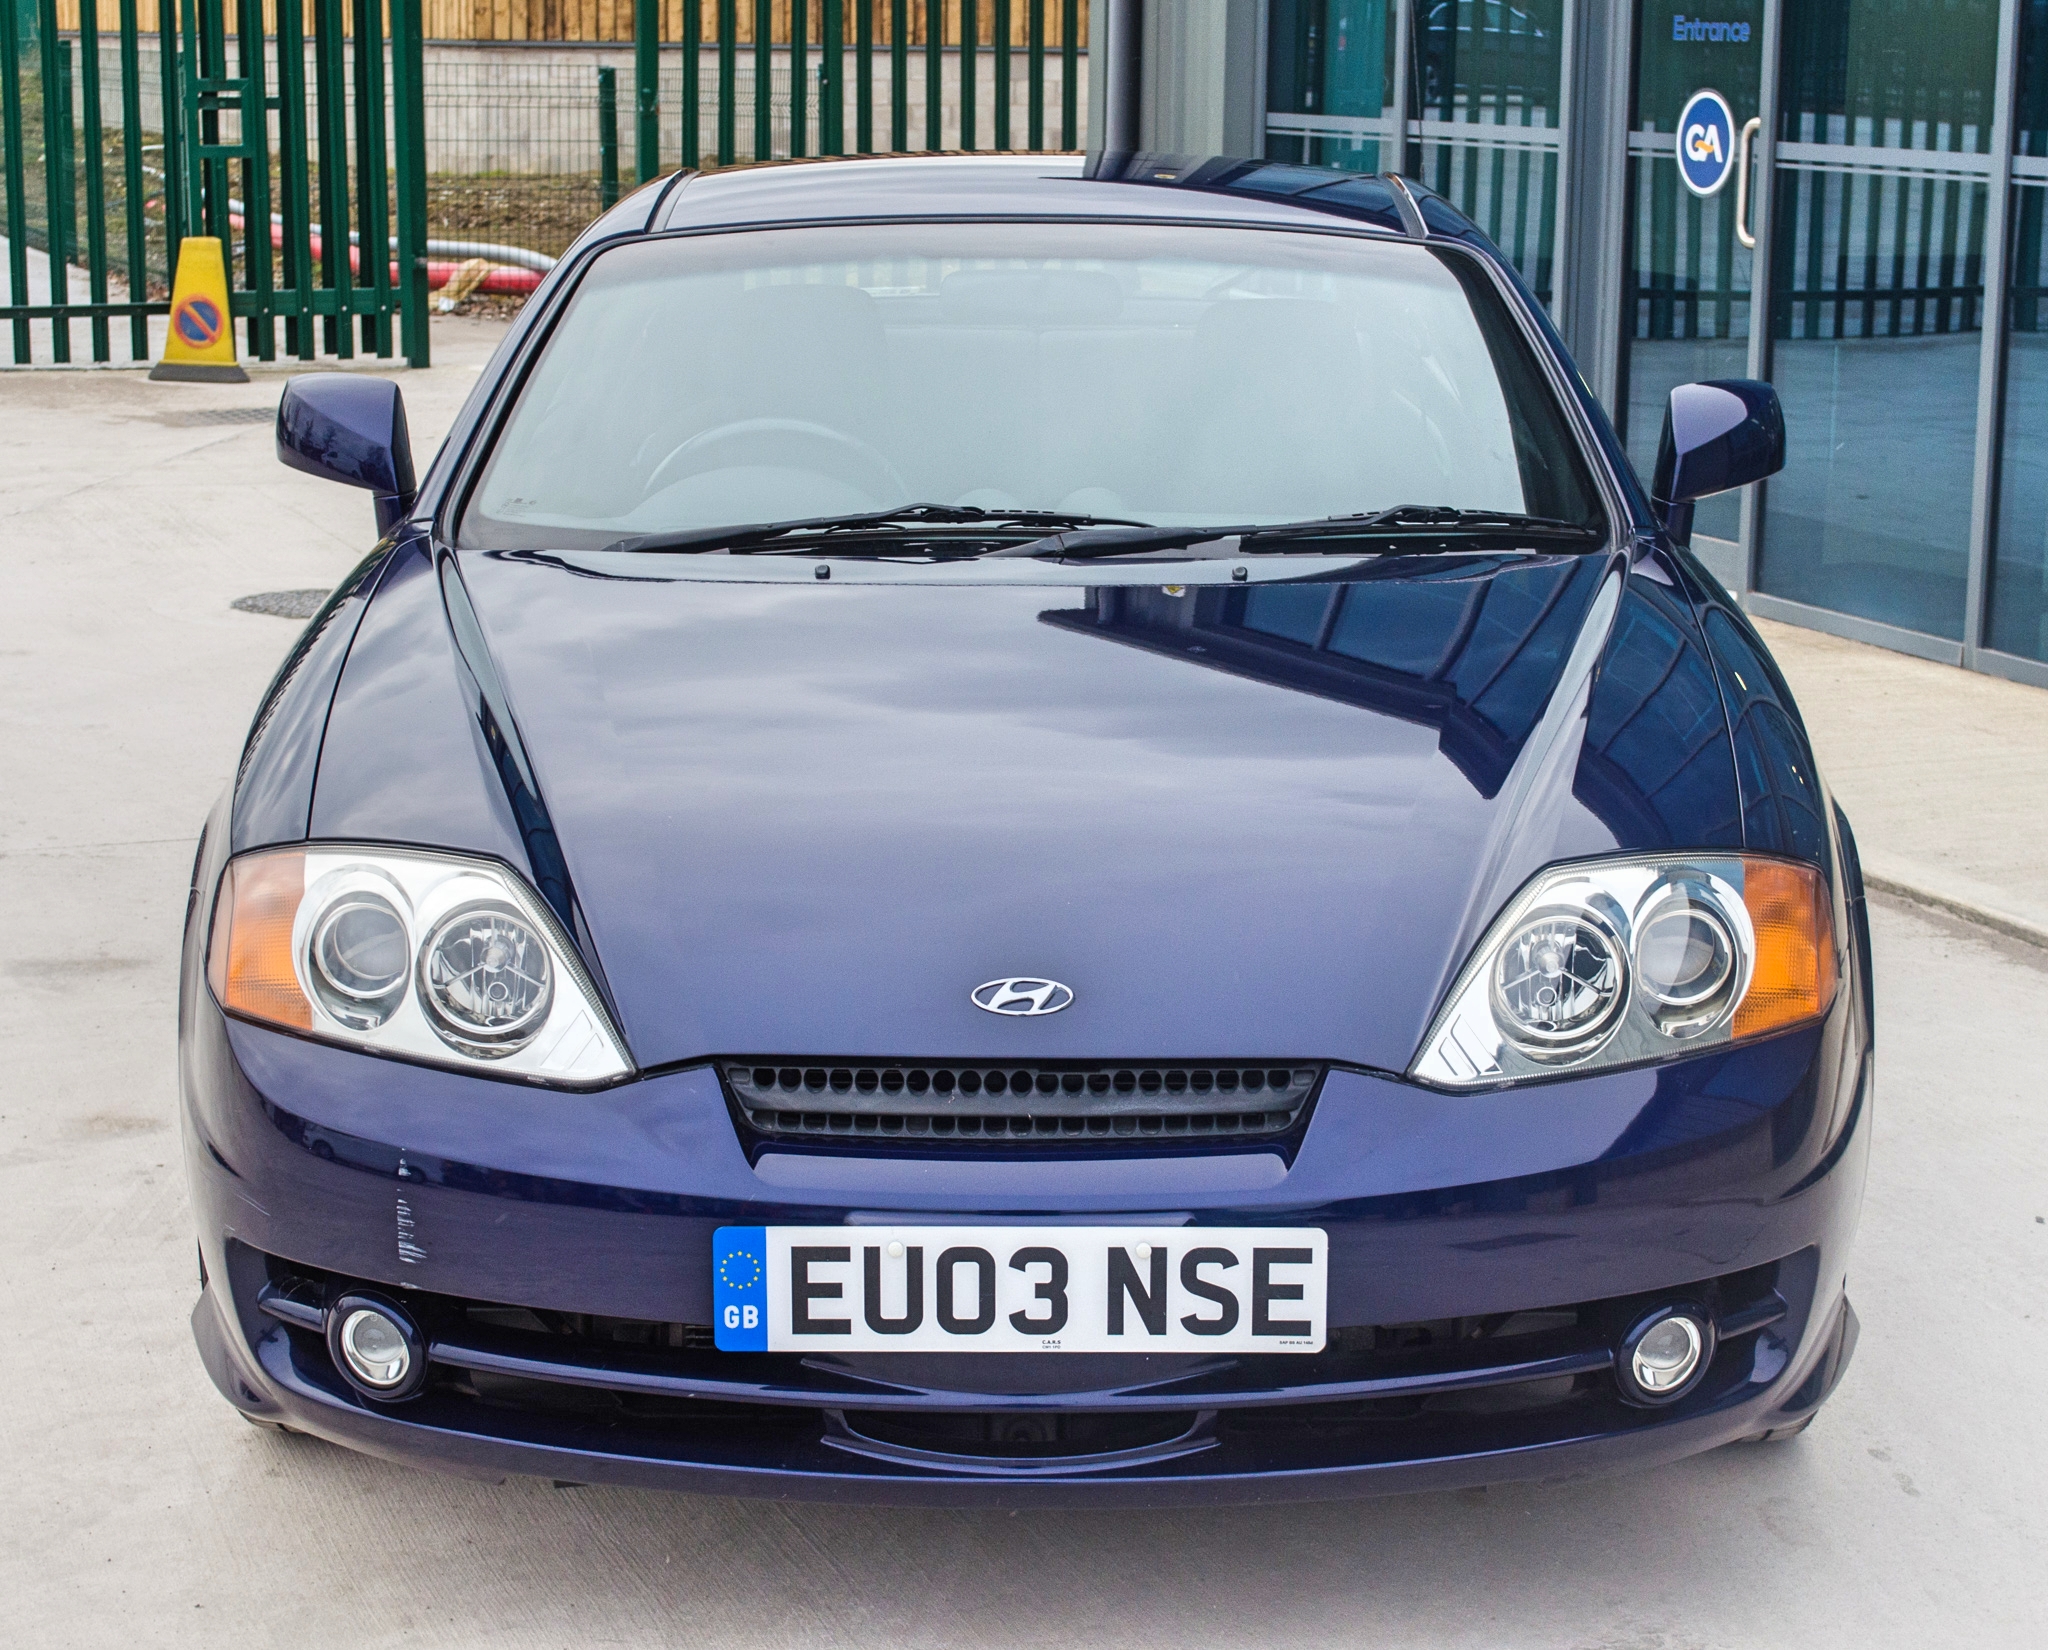 2003 Hyundai Coupe 1.6 S 1600 cc 3 door coupe - Image 10 of 56